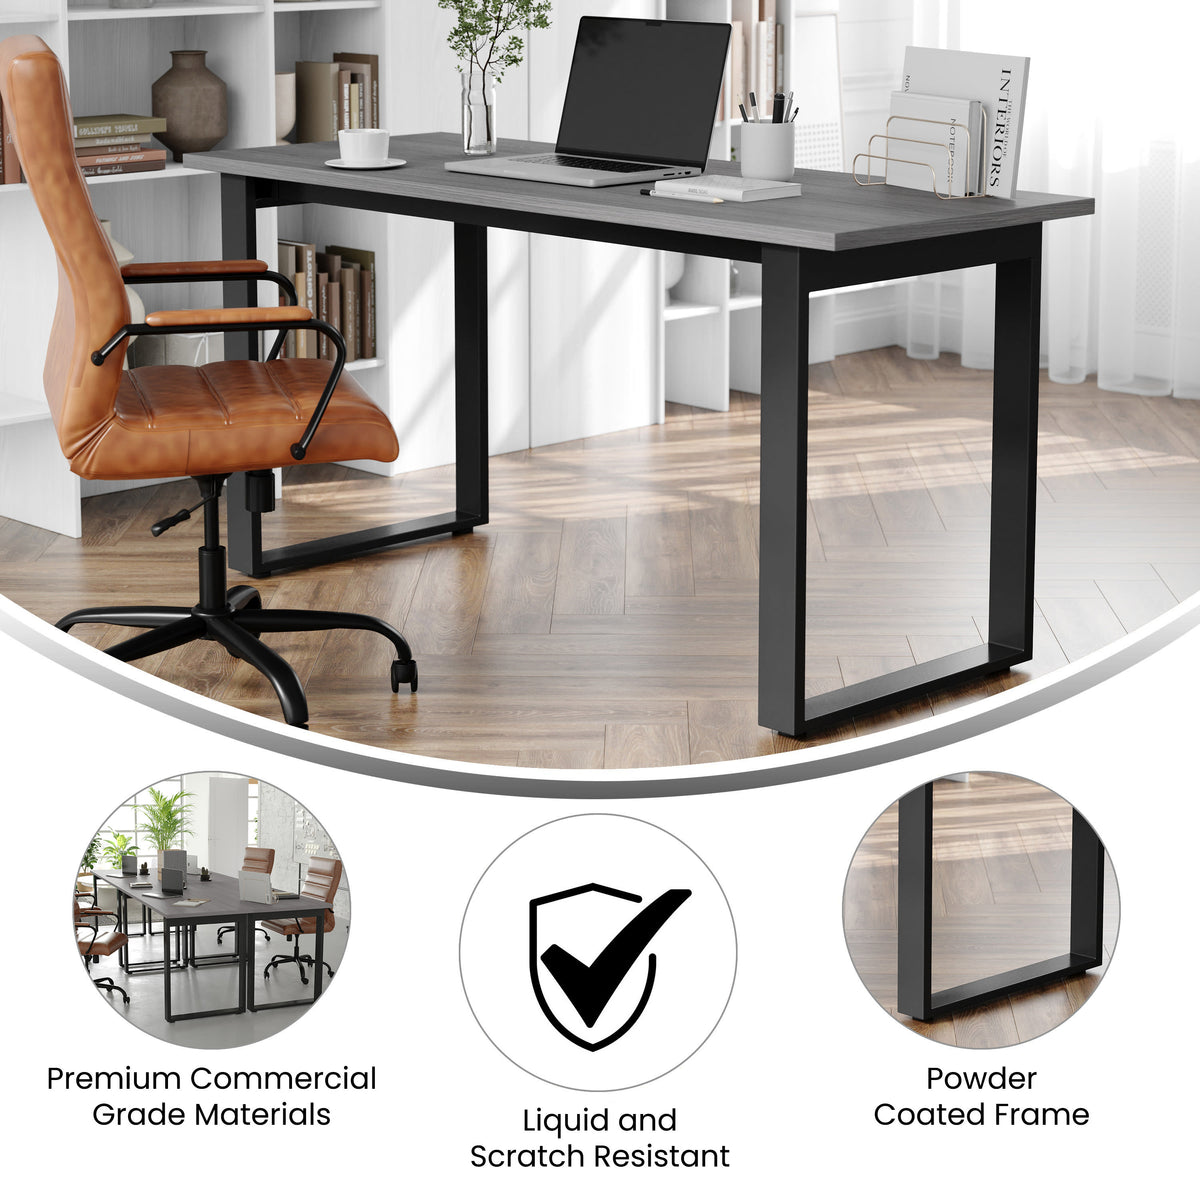 Gray Oak |#| Commercial 60x24 Conference Table with Laminate Top and U-Frame Base - Gray Oak